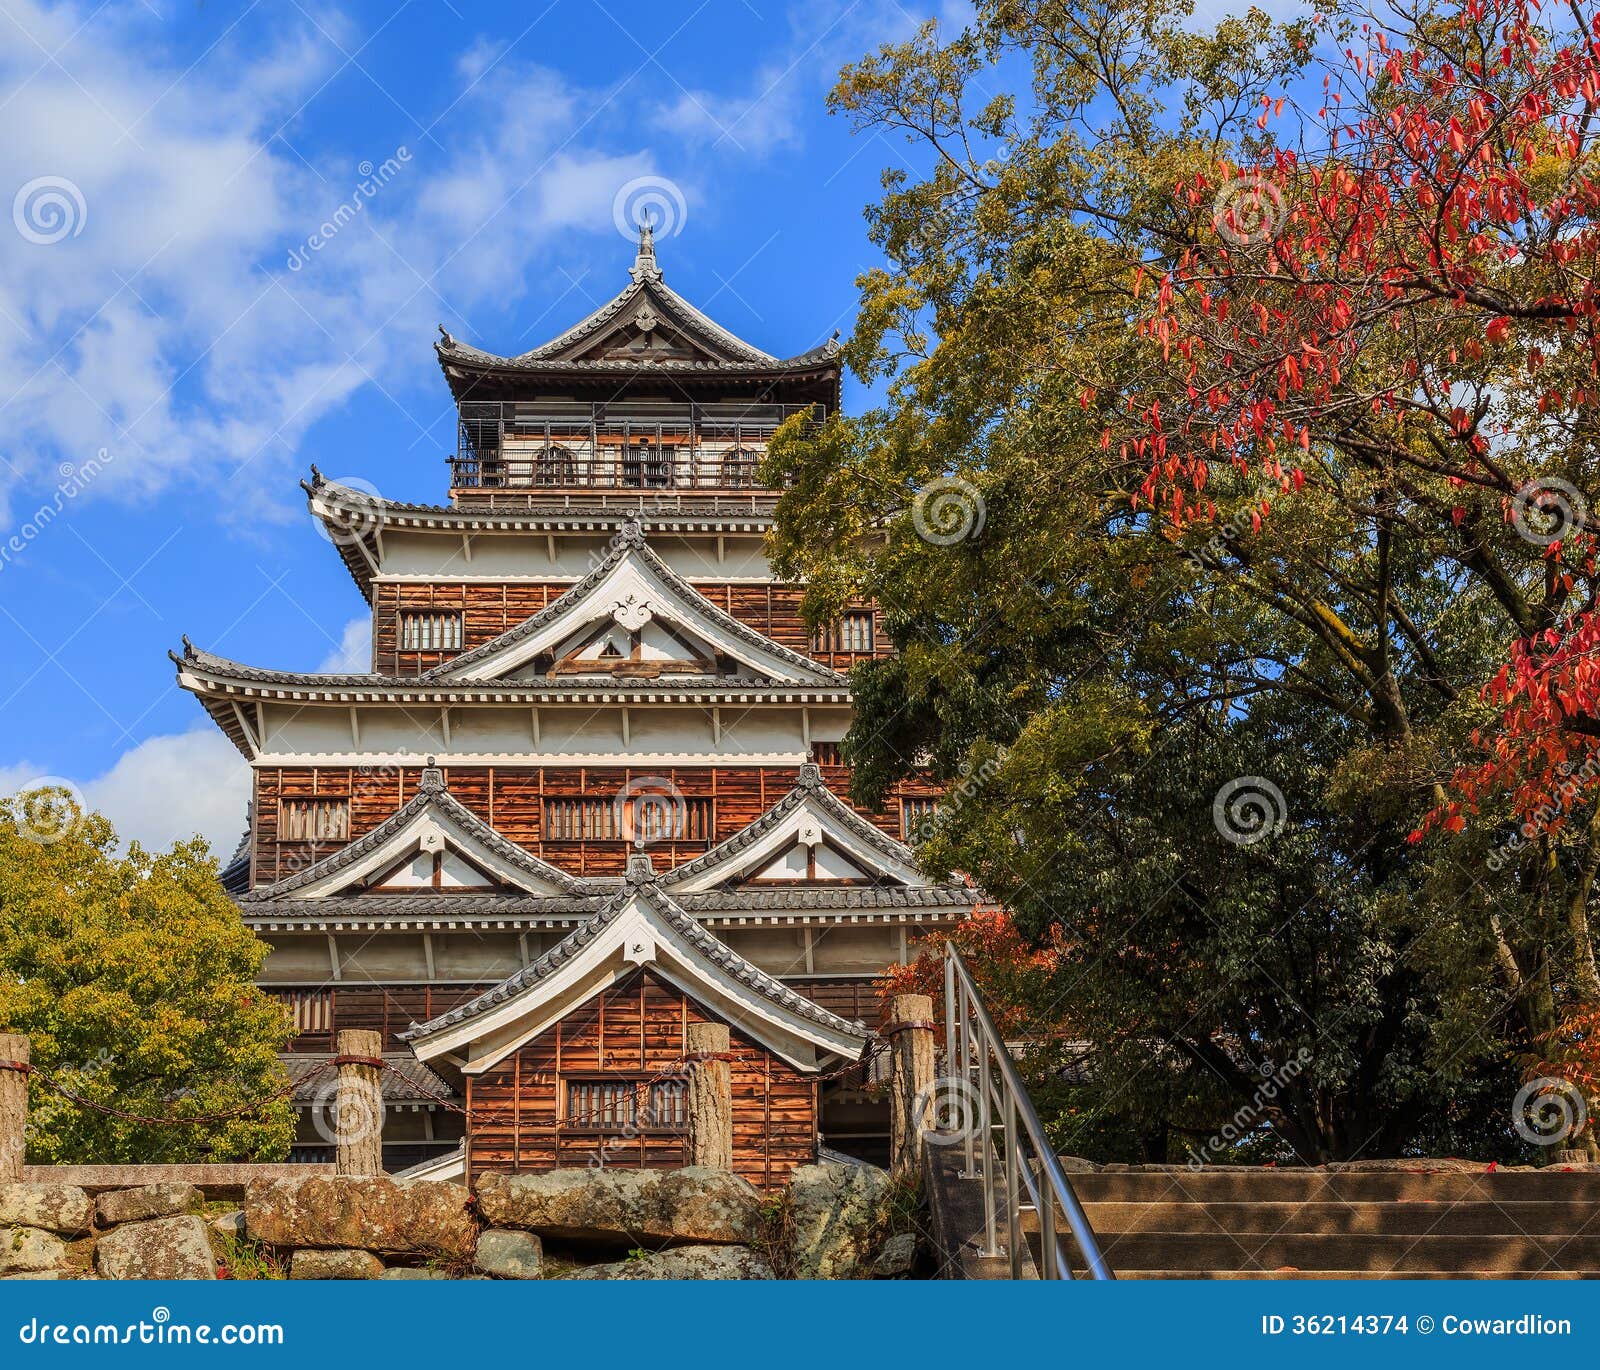 Hiroshima castle on the side of Otagawa river in autumn HIROSHIMA, JAPAN - NOVEMBER 15: Hiroshima Castle in Hiroshima, Japan on November 15, 2013. Built in 1589 by the powerful feudal lord Mori Terumoto, it was an important seat of power in Western Japan